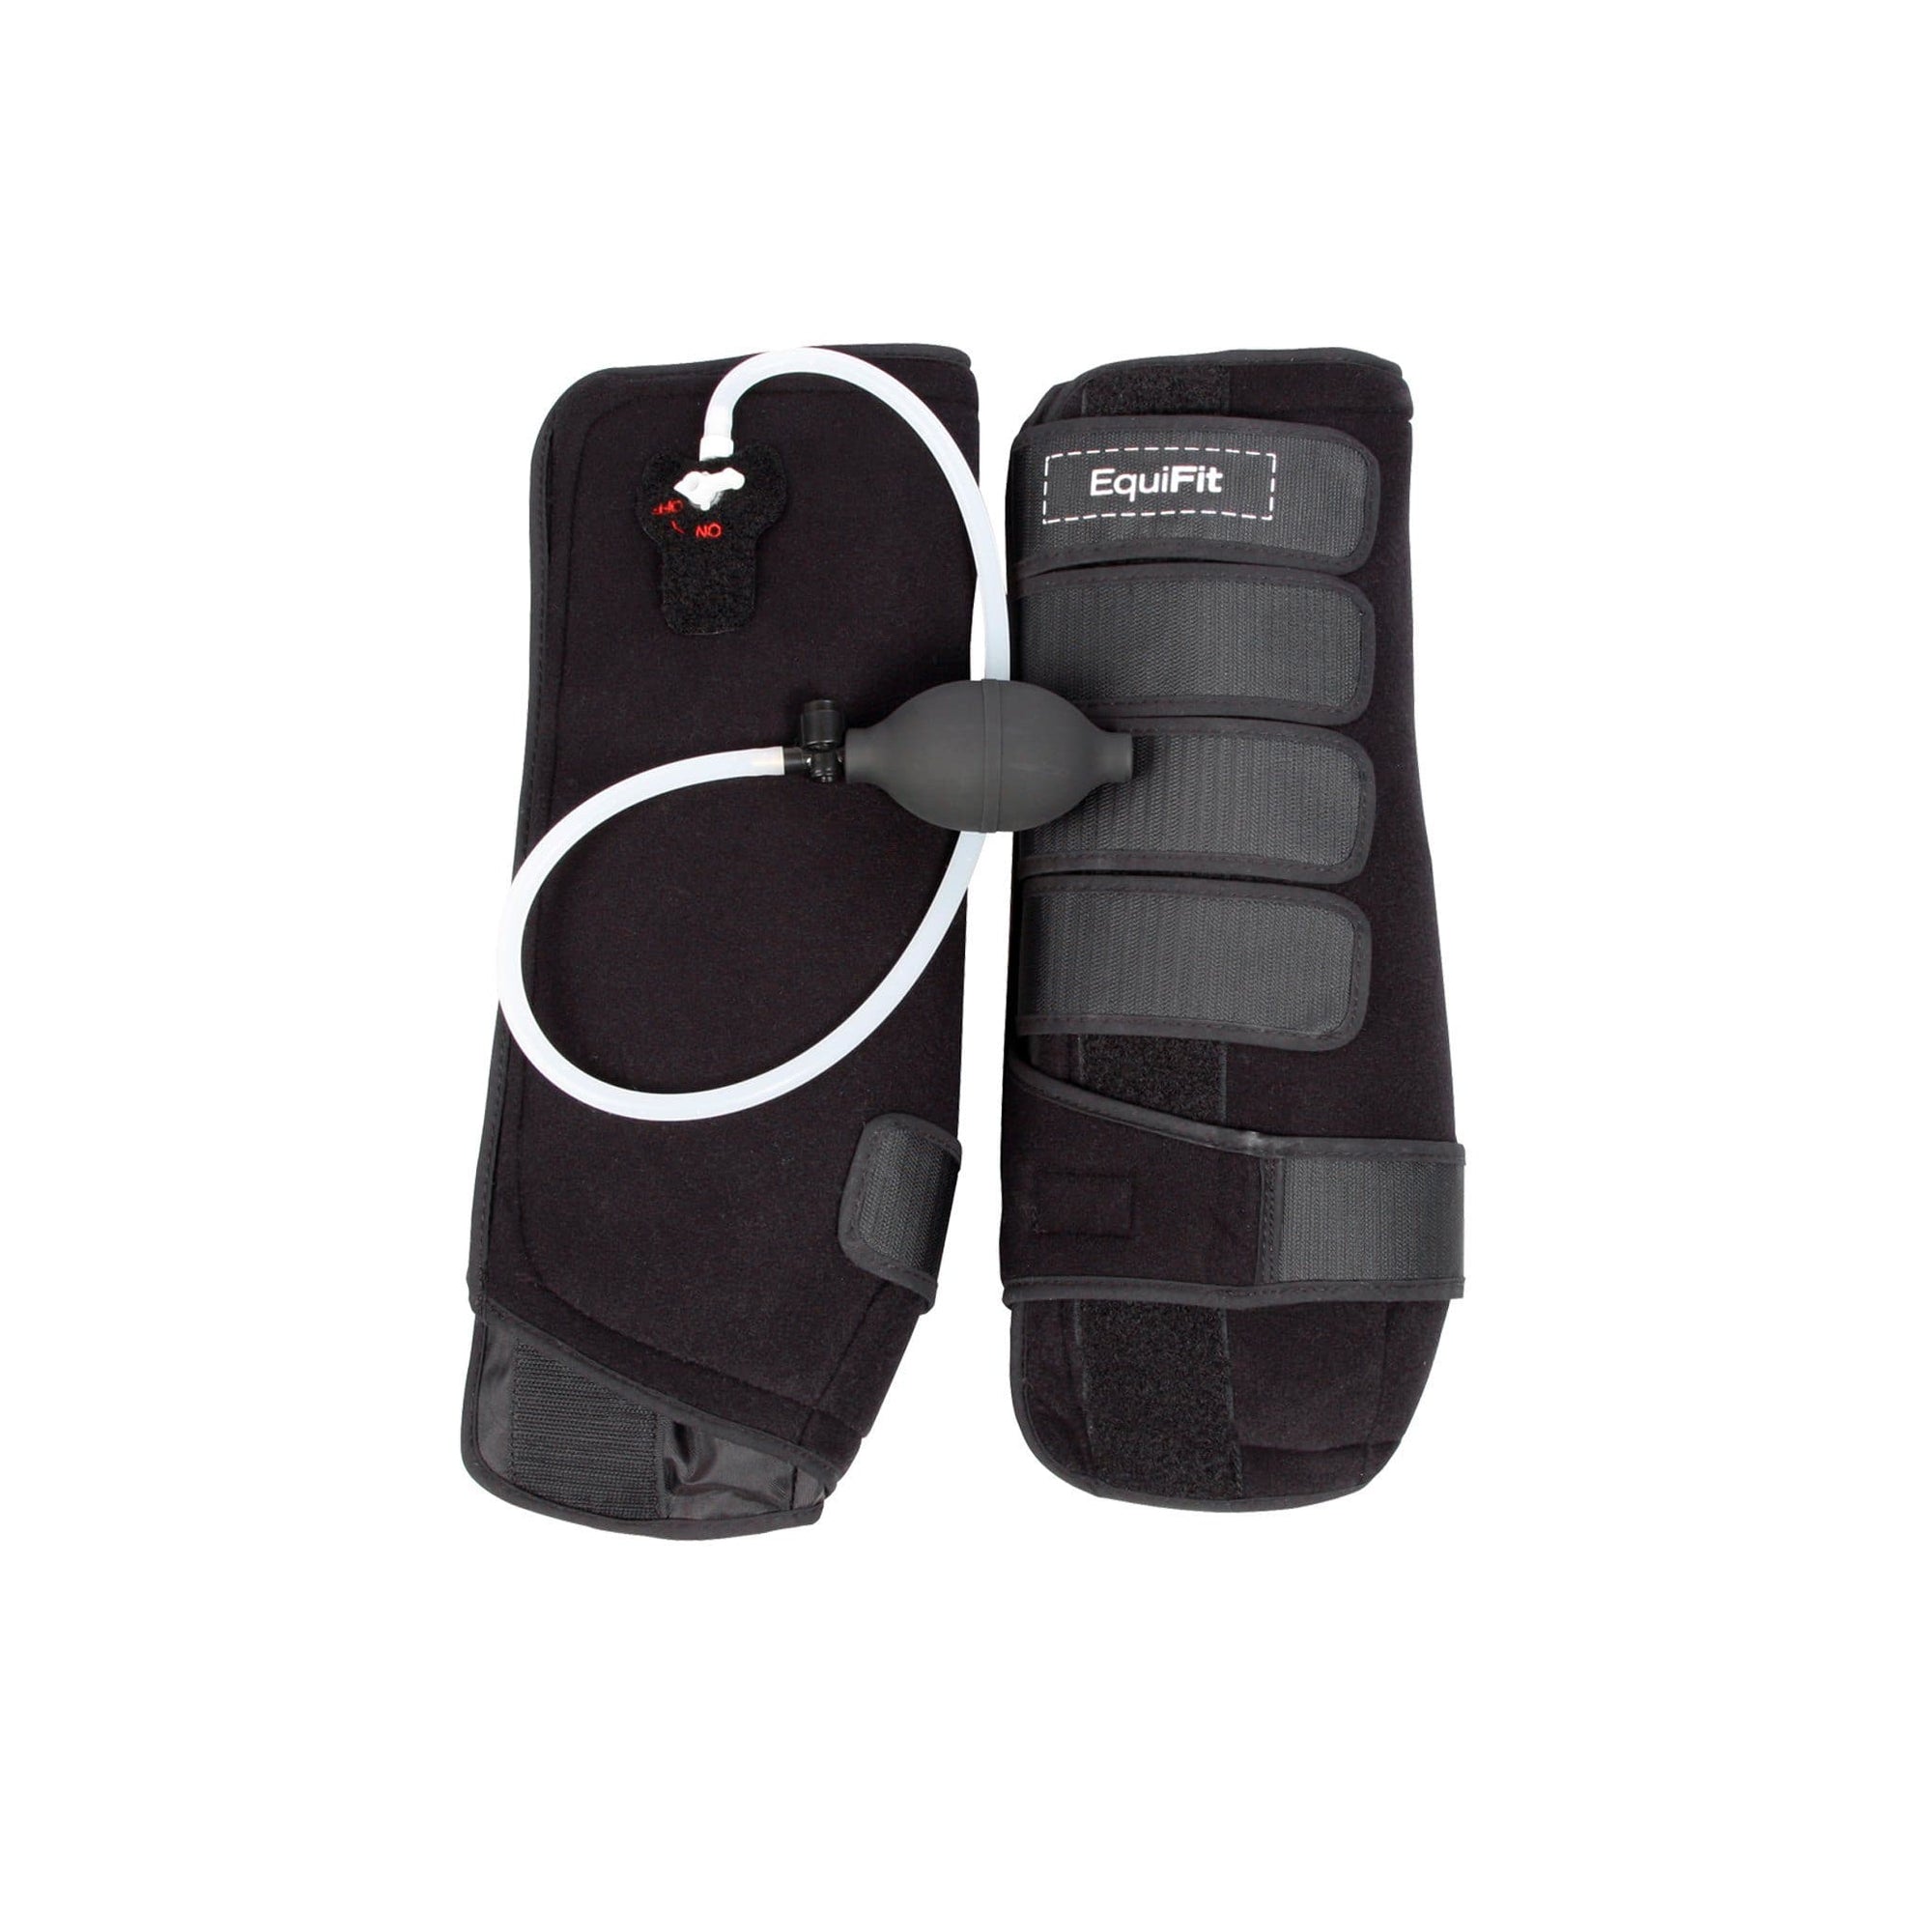 GelCompression TendonBoots Reduce inflammation, arthritis, bruises, injuries or will control swelling